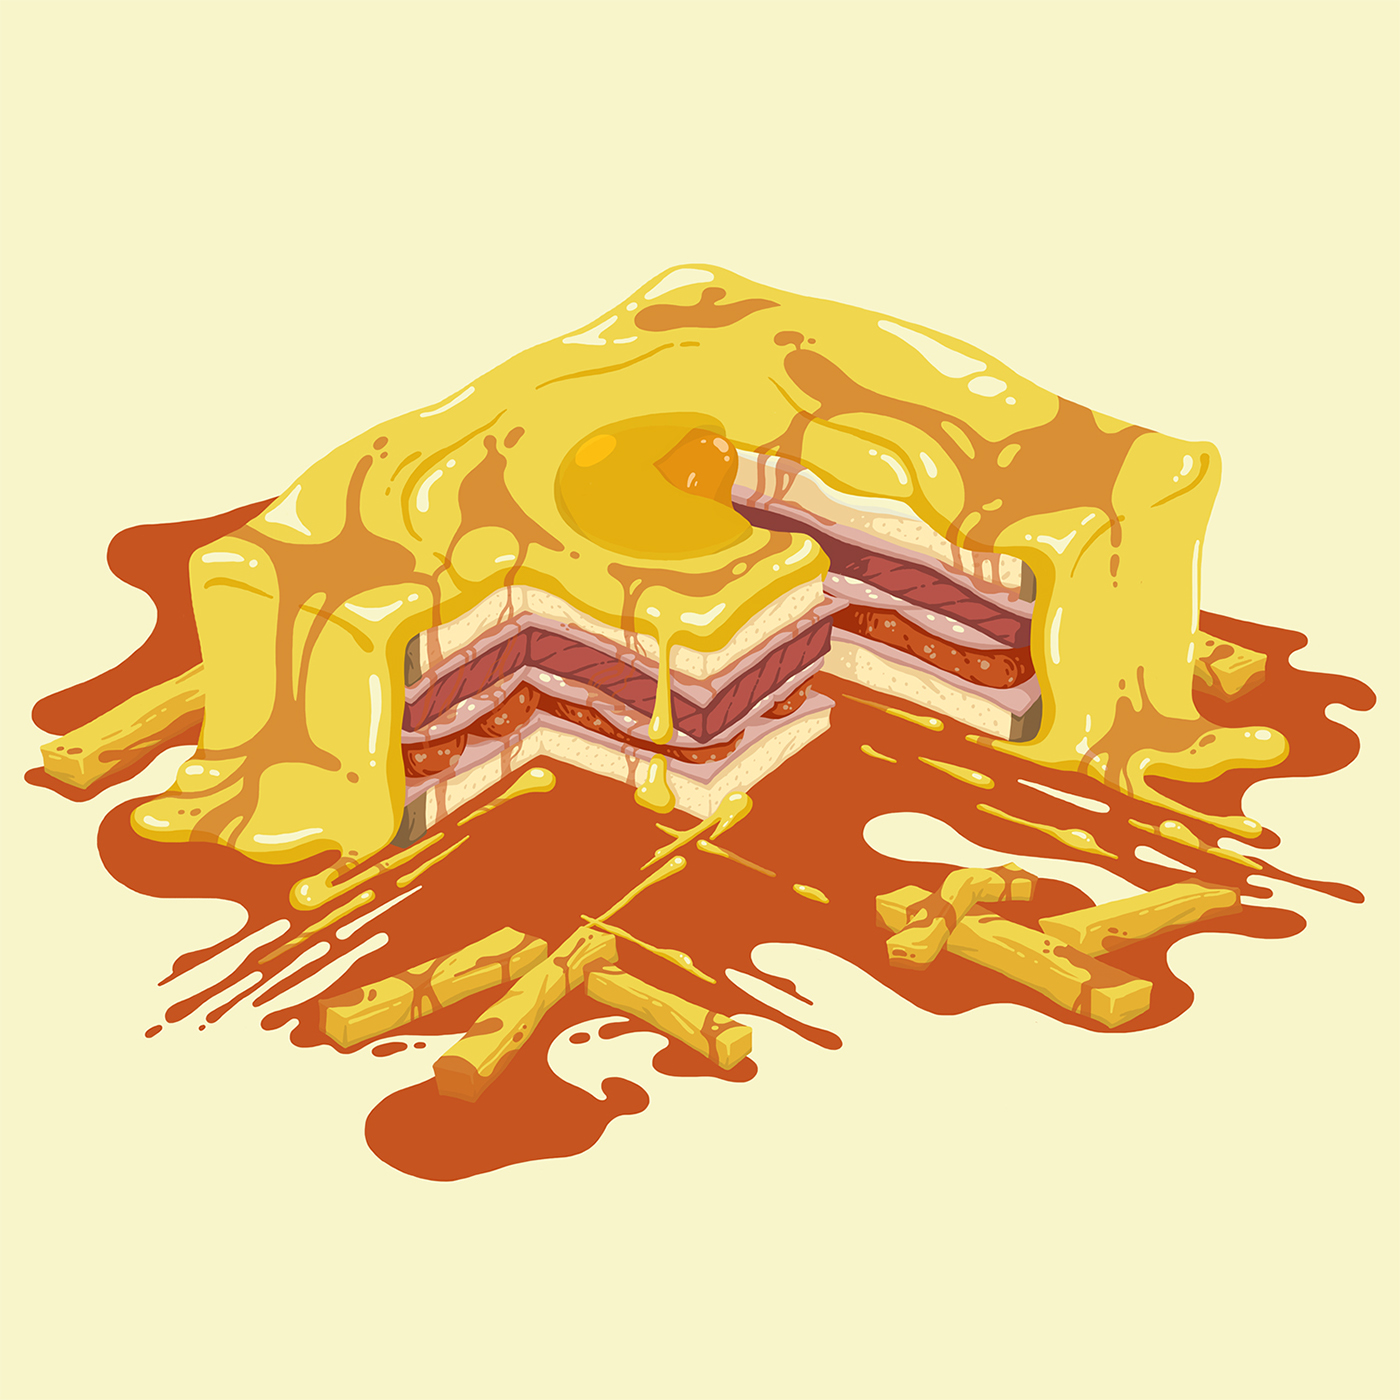 36daysoftype 36typesofsnacks ABC alphabet letters numbers 36days snacks colors Food  icecream Sweets Cheese francesinha